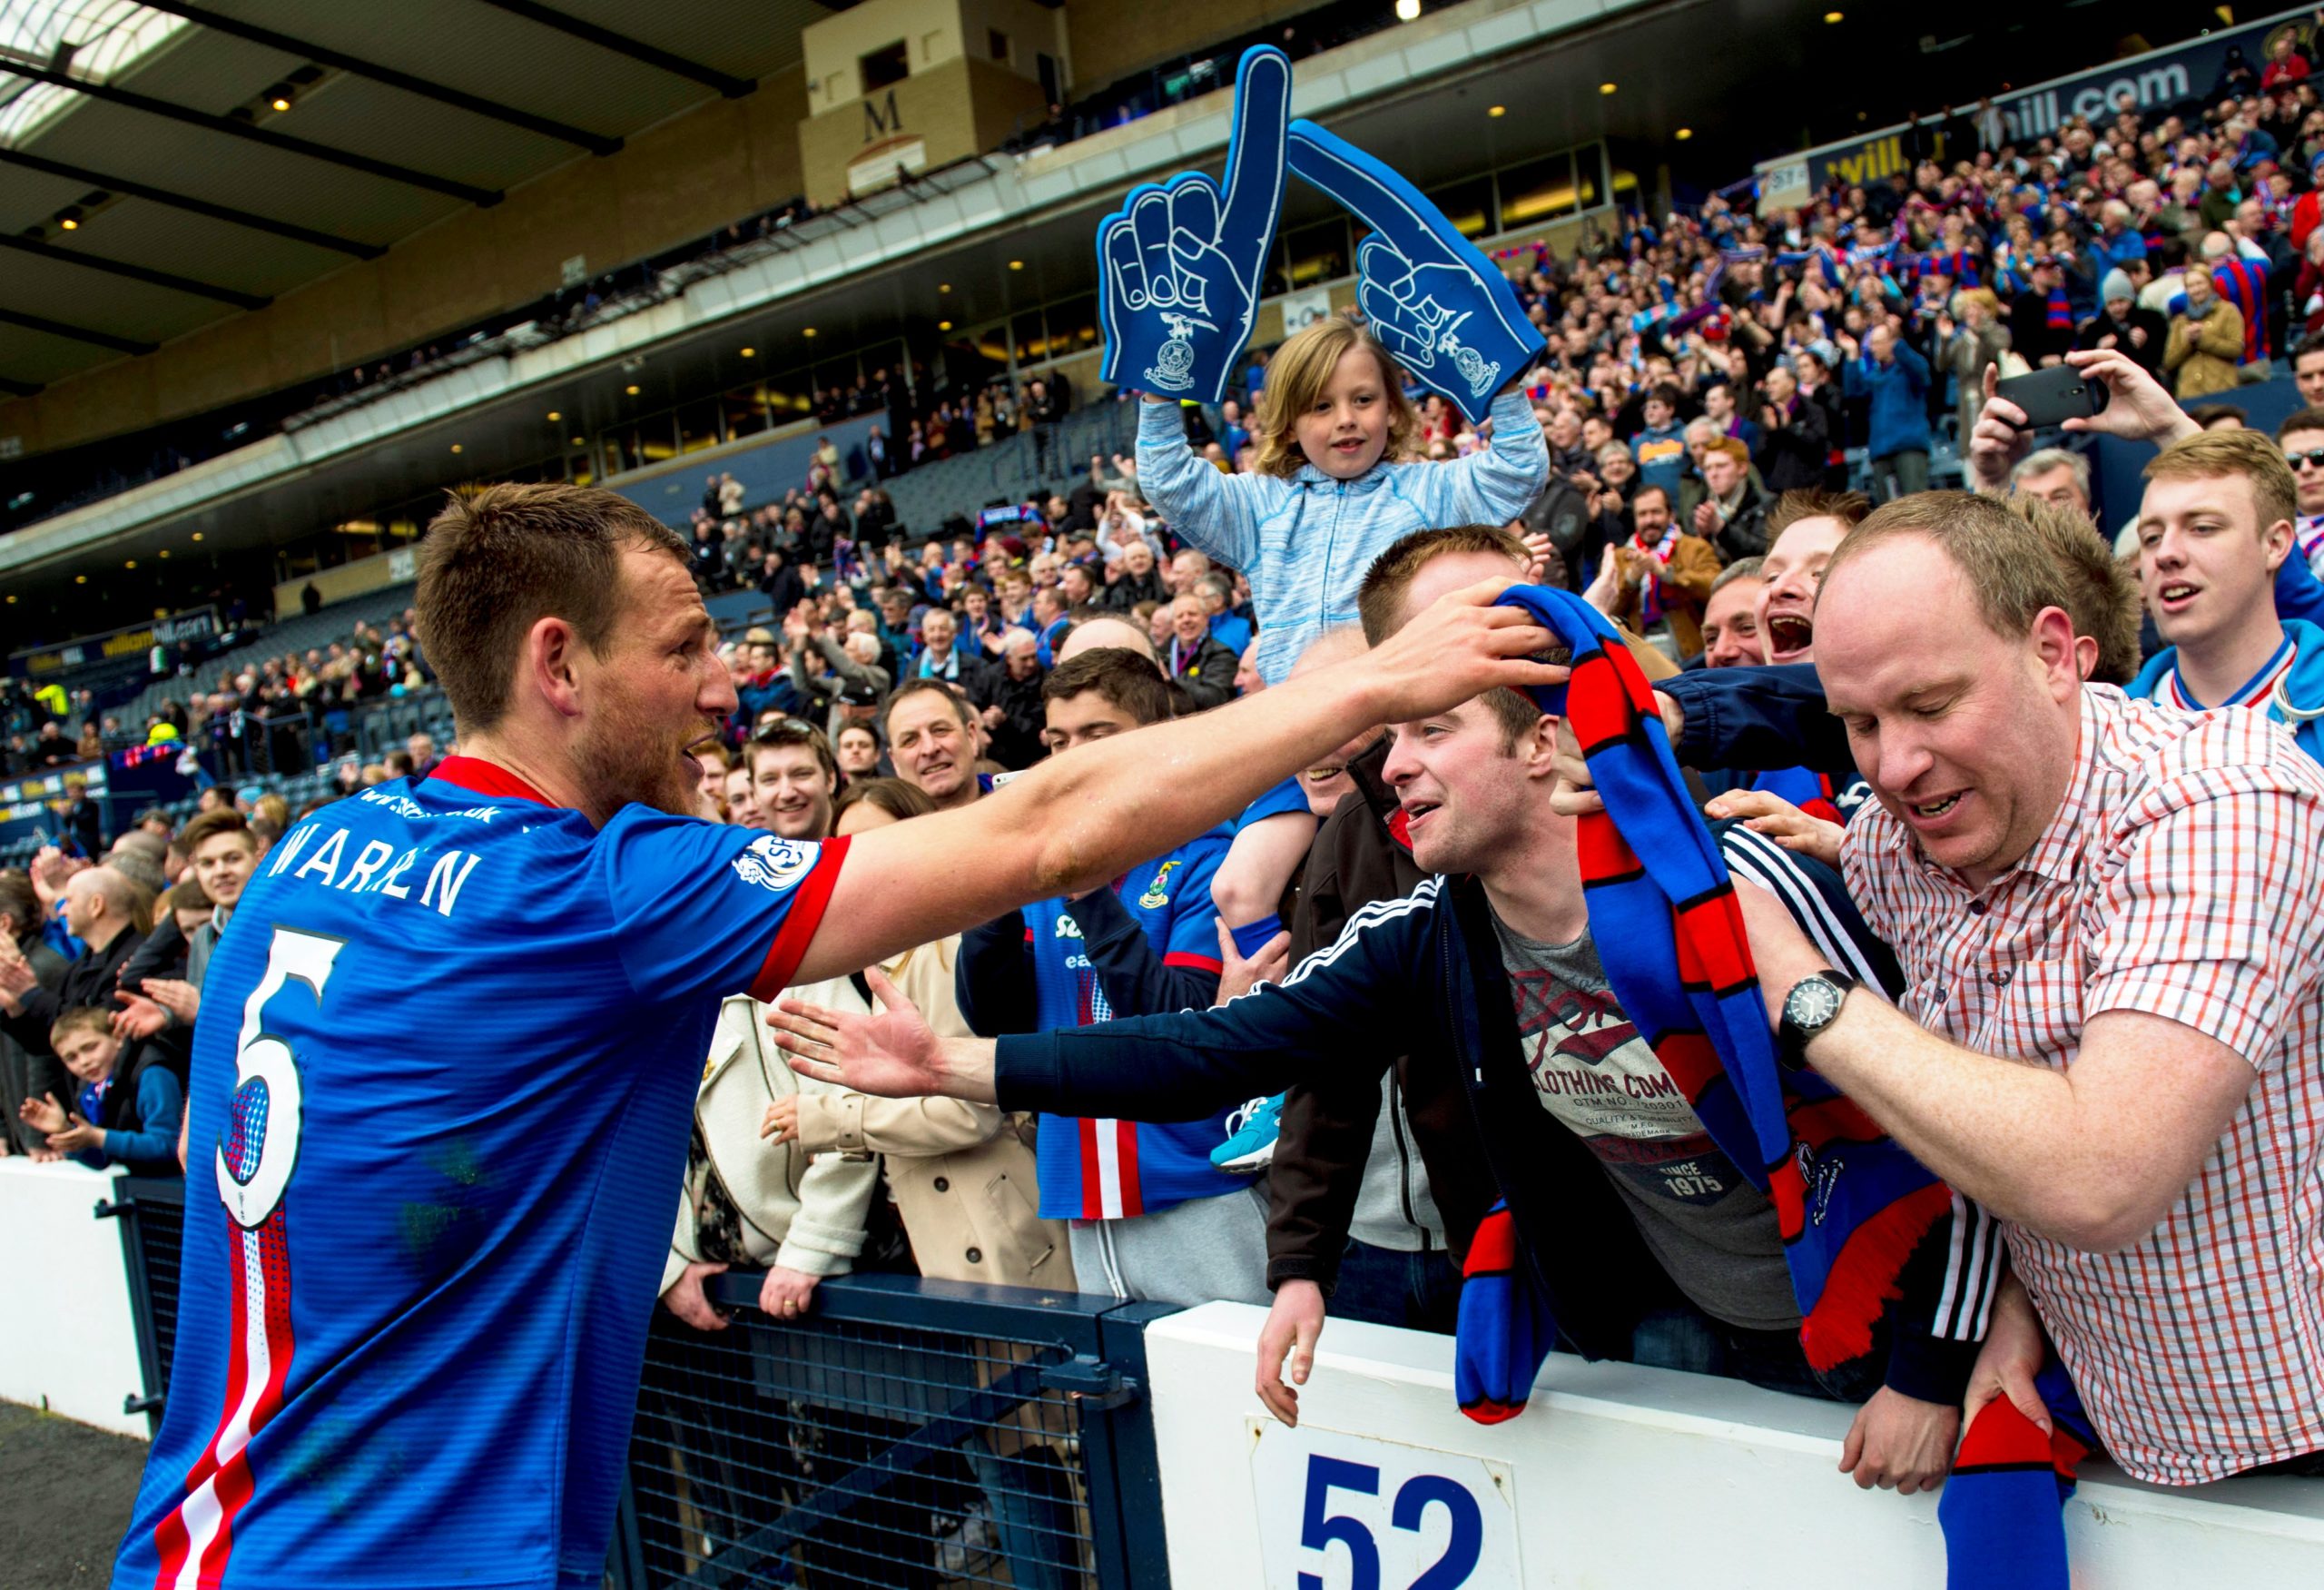 Gary Warren celebrates with the Caley Thistle fans after beating Celtic.